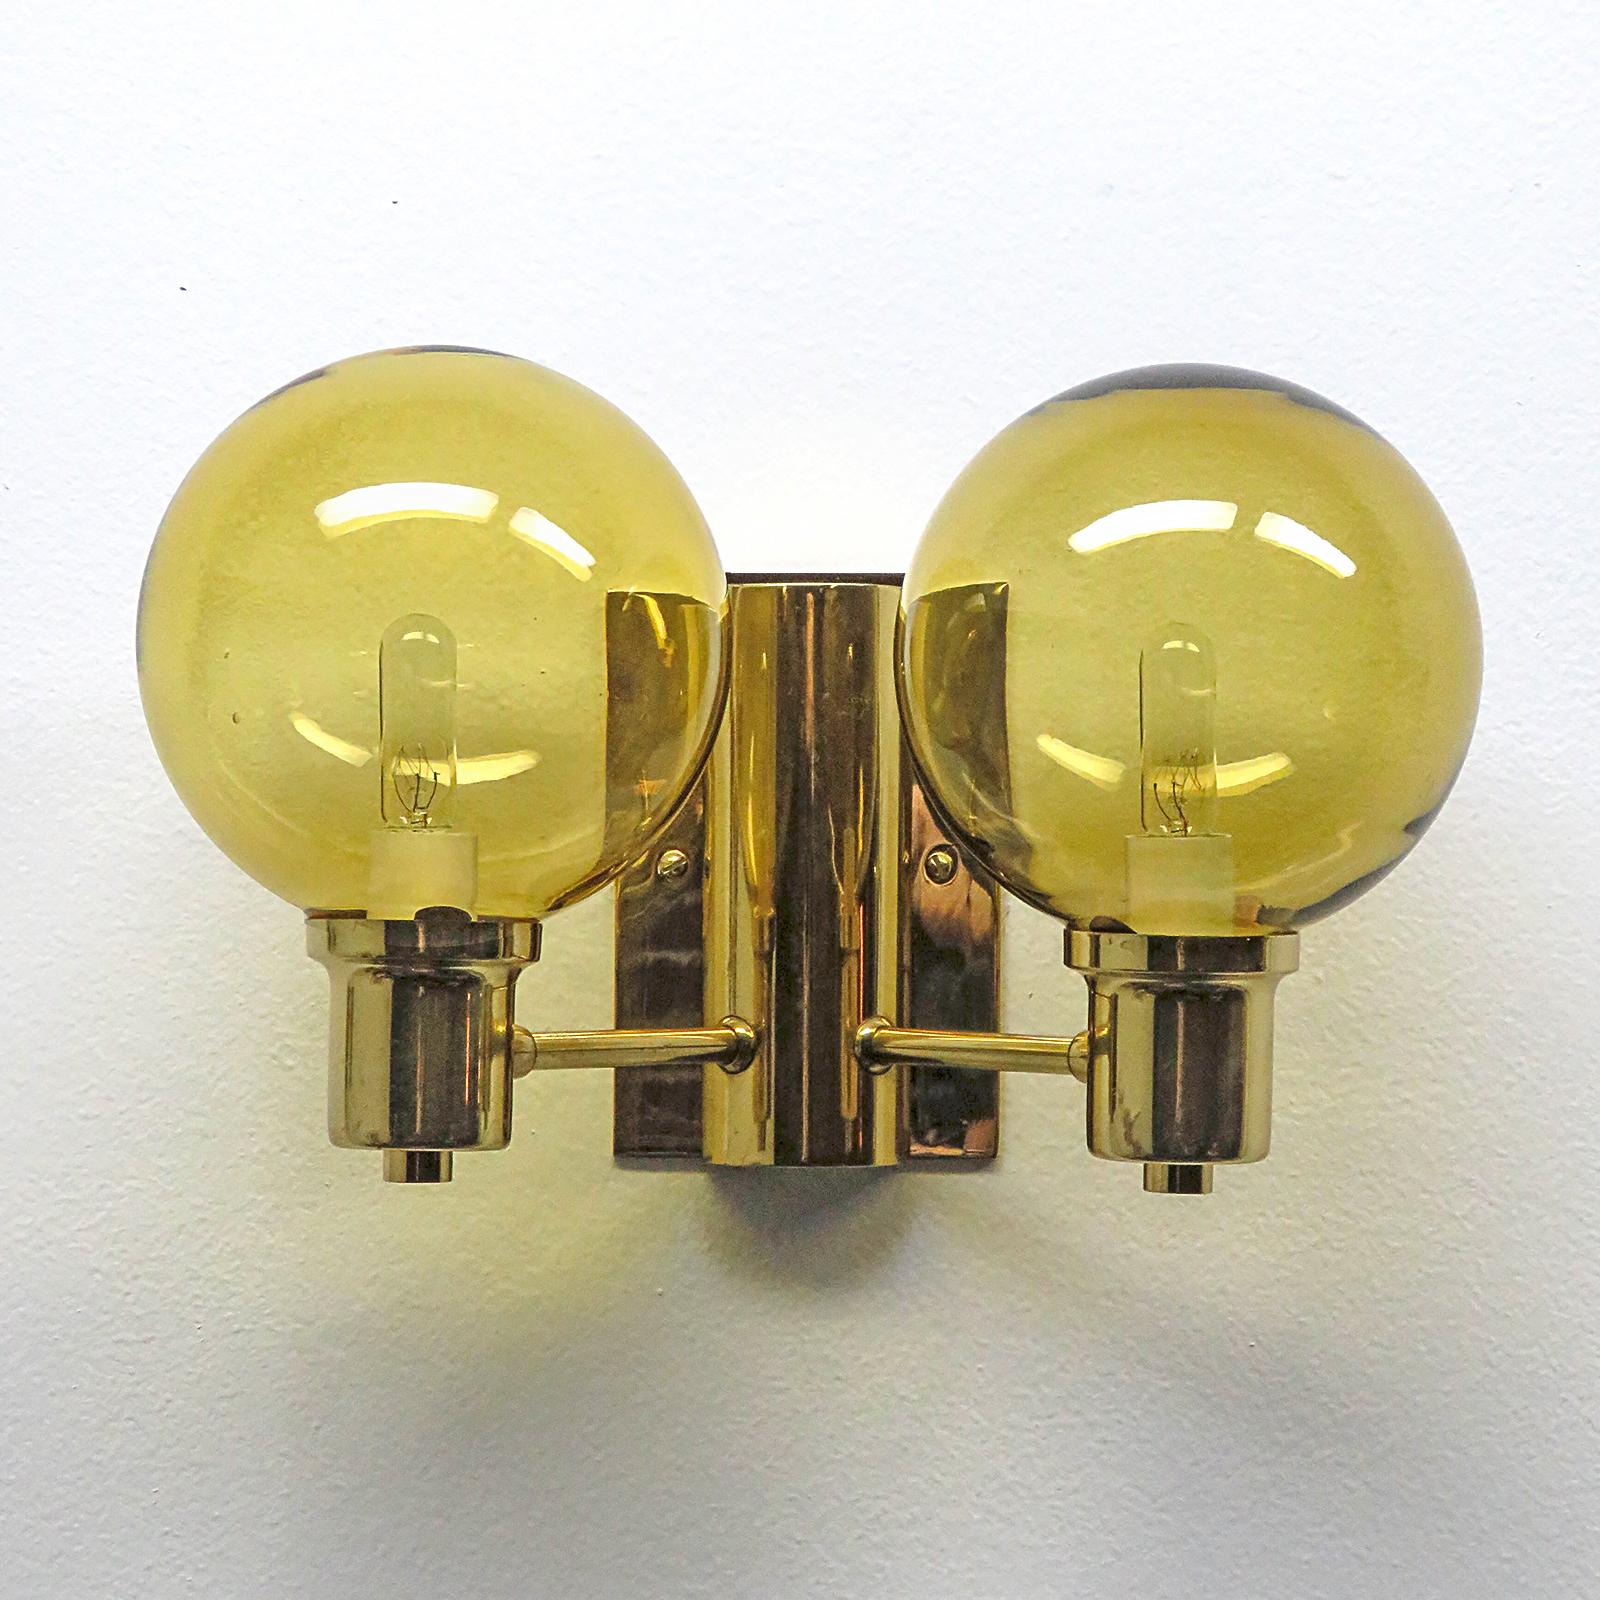 Wonderful Swedish double arm wall lights by Hans Agne Jakobsen with amber colored cut glass shades, custom backplate for US j-boxes, wired for US standards, two E12 sockets per fixture, max. wattage 40w per socket, bulbs provided as a one time